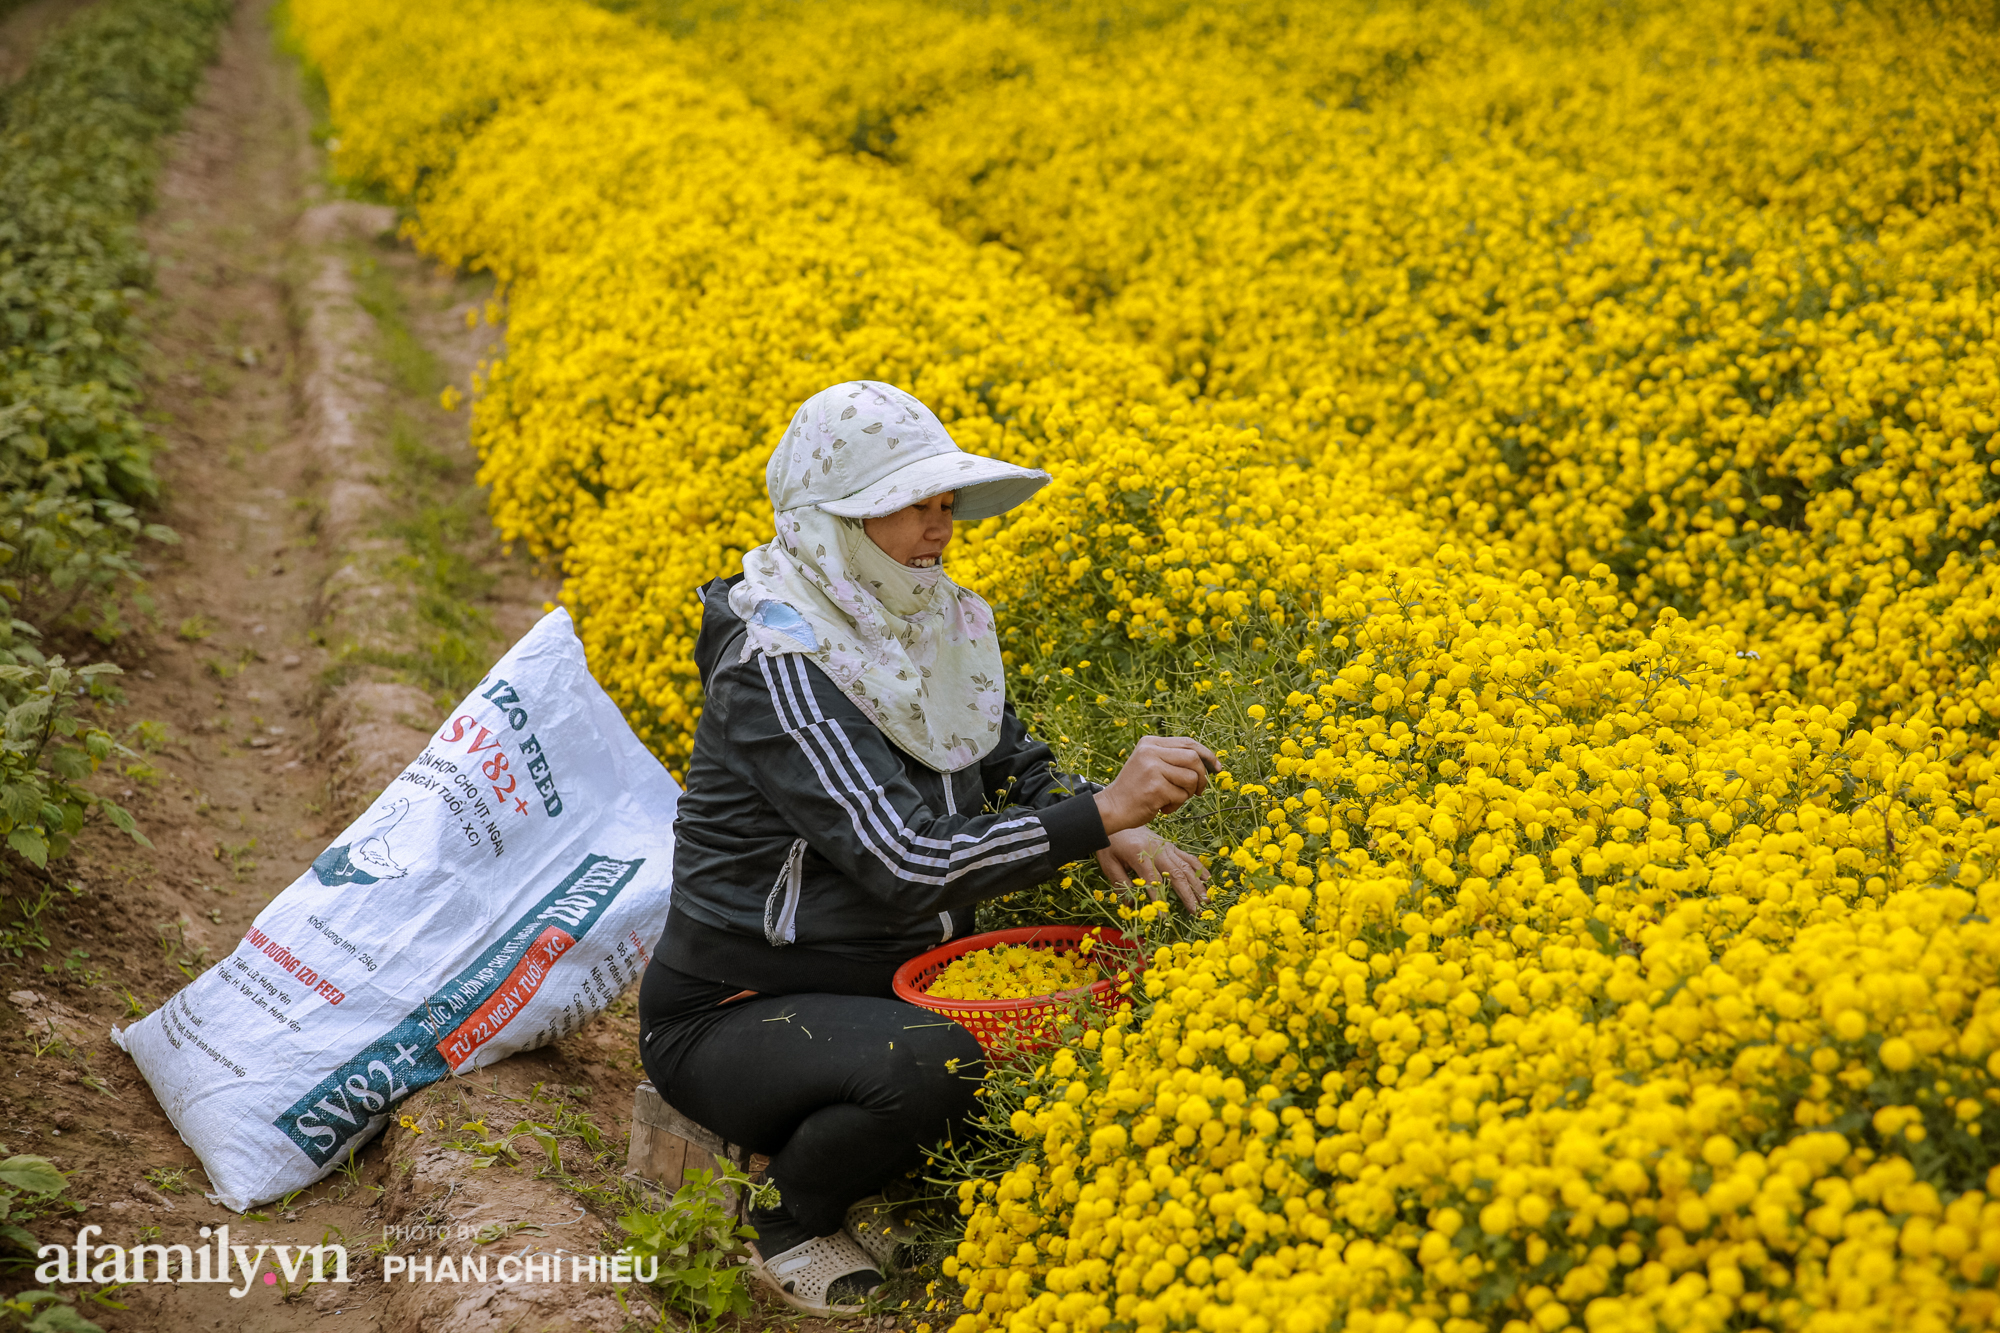 Visit a hundred-year village near Hanoi, possessing the "kingly" chrysanthemum fields  golden, making people everywhere pouring in to take pictures - Photo 9.